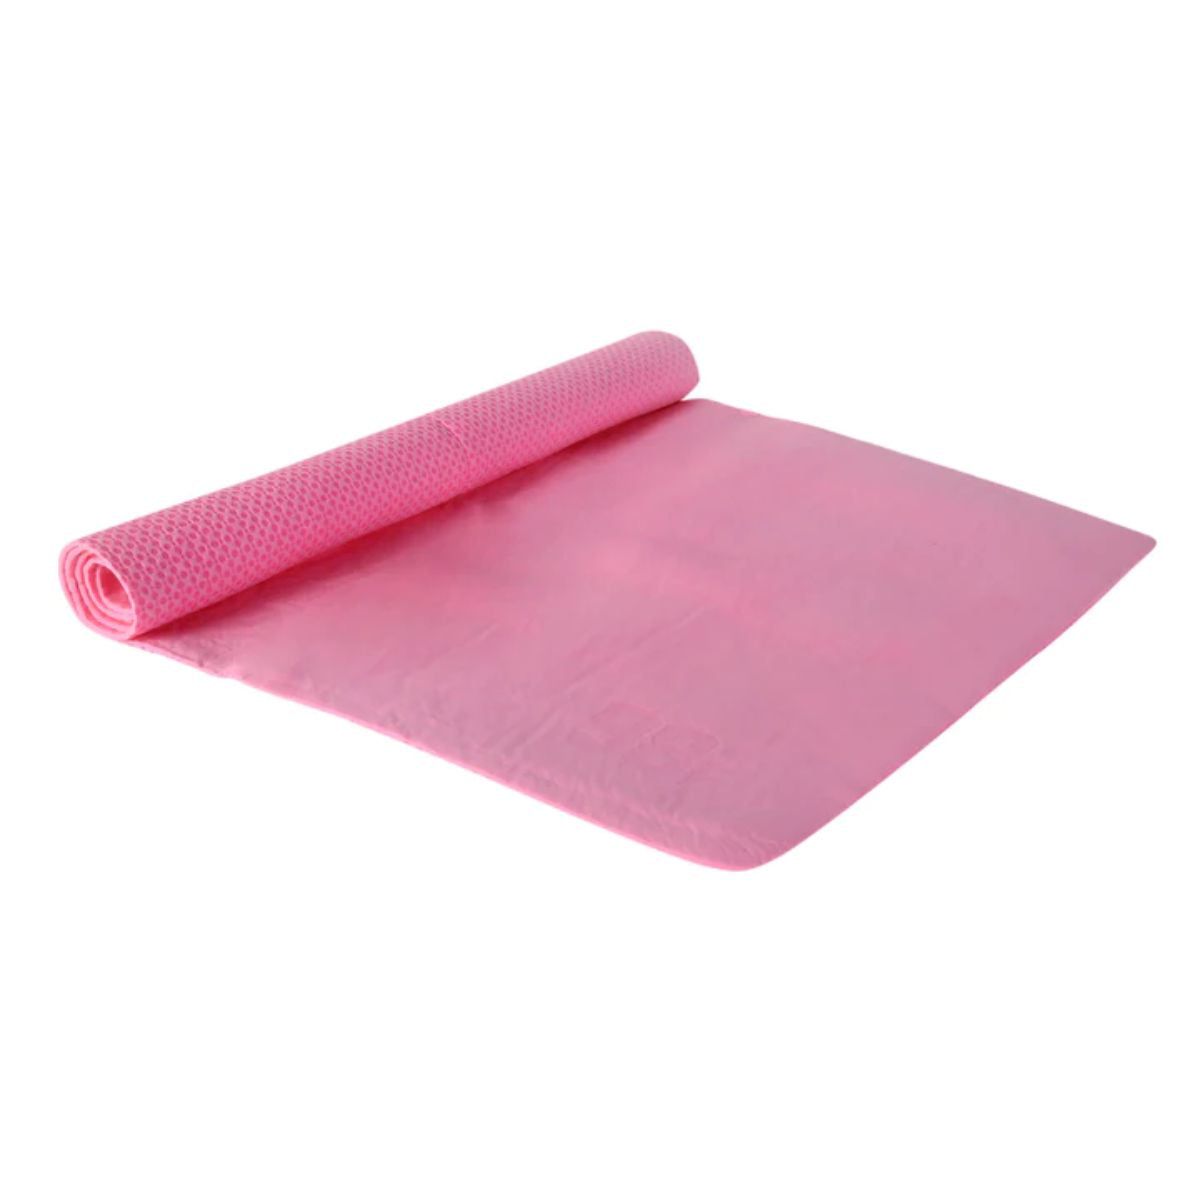 Hyper Body Cooling Towel - Pink 2